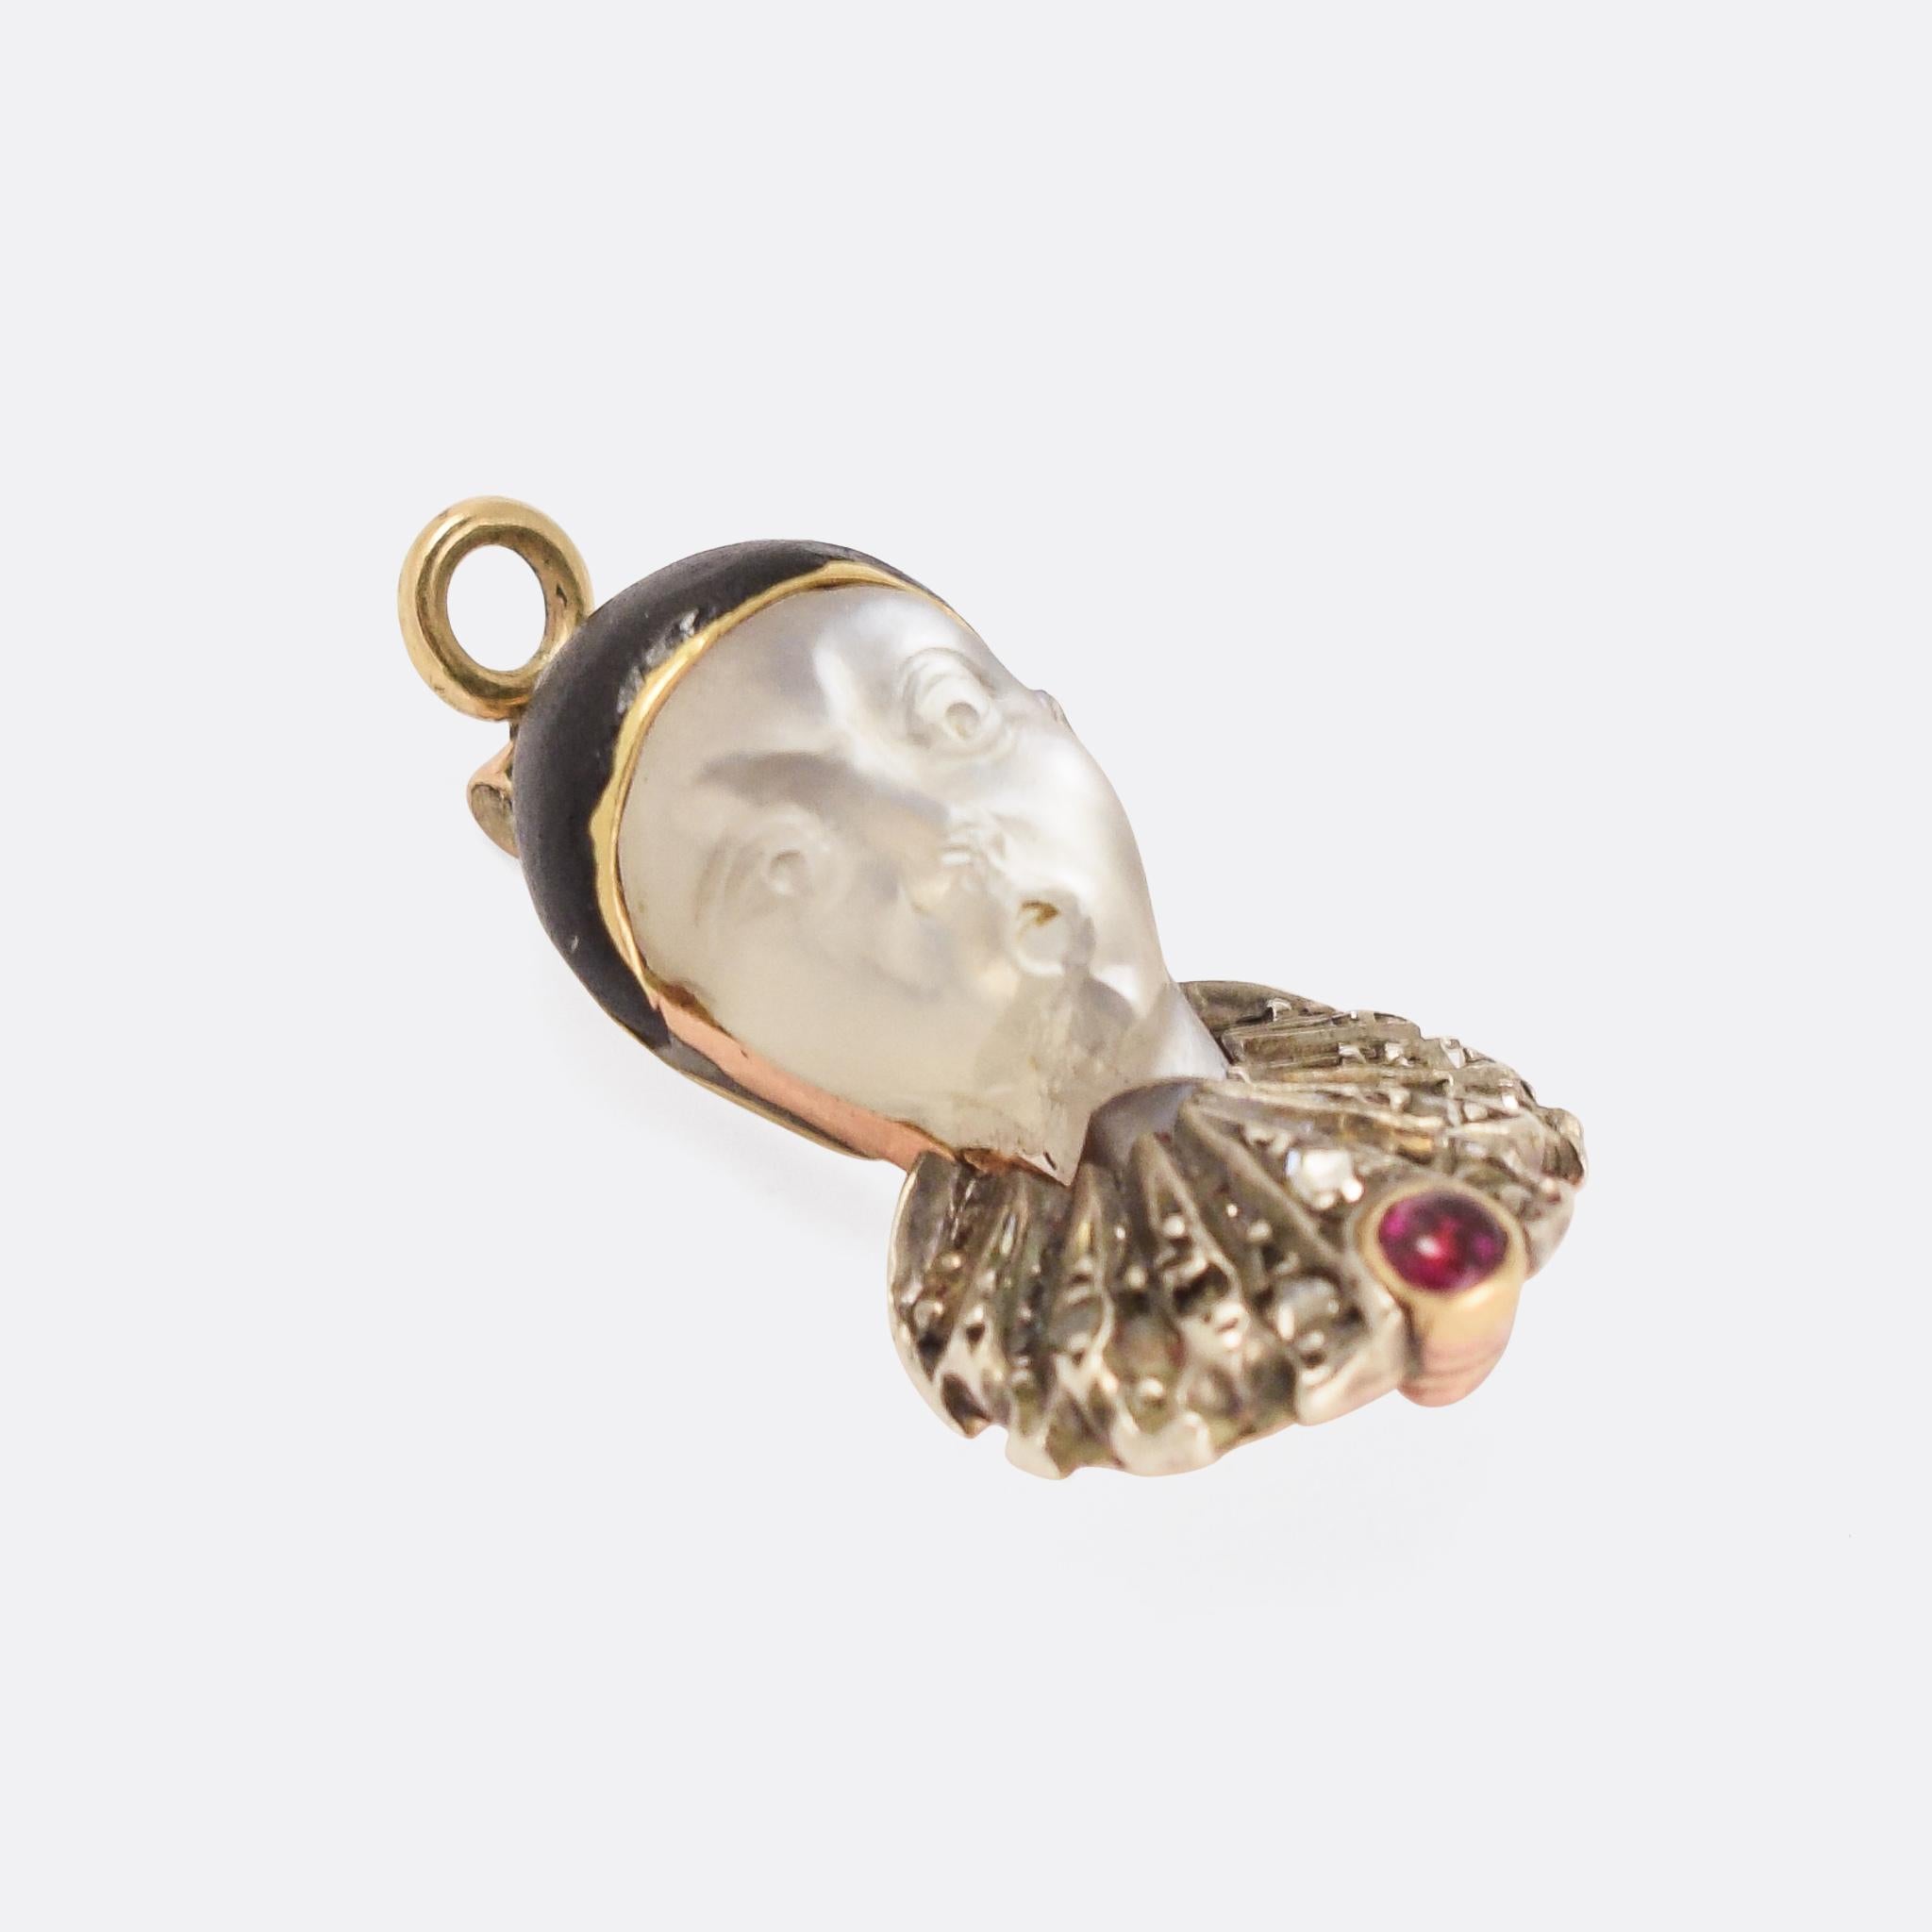 An exceptional early Victorian moonstone Pierrot pendant dating from the 1850s. Pierrot is a pantomime character whose origins are in the late seventeenth-century Italian troupe of players performing in Paris and known as the Comédie-Italienne.